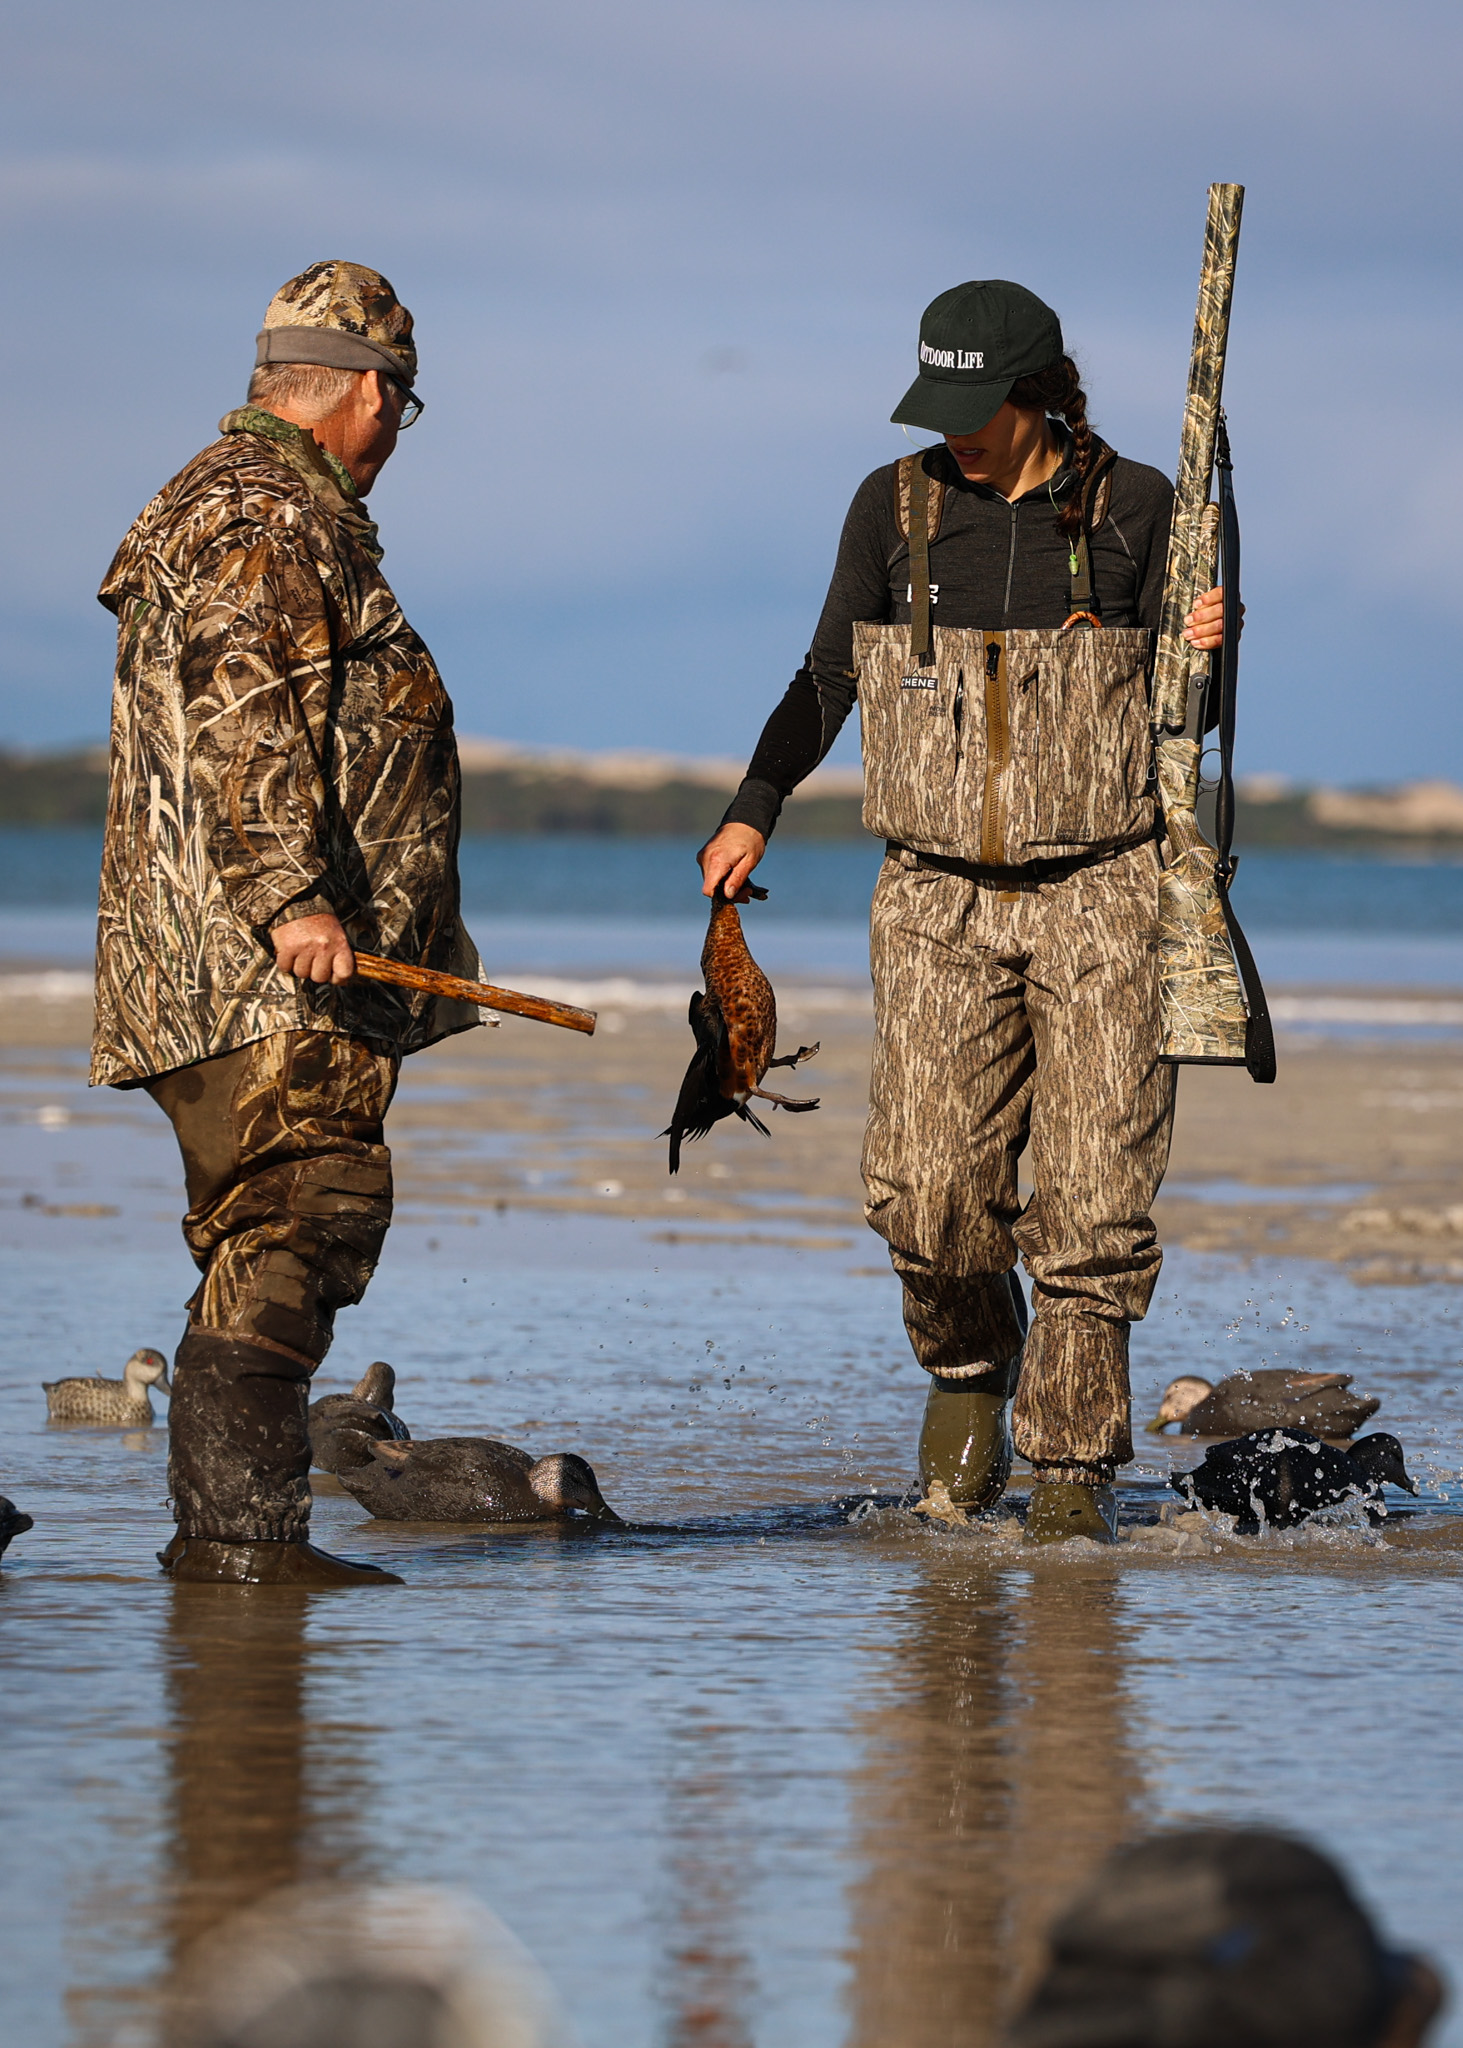 A pair of duck hunters in South Australia.